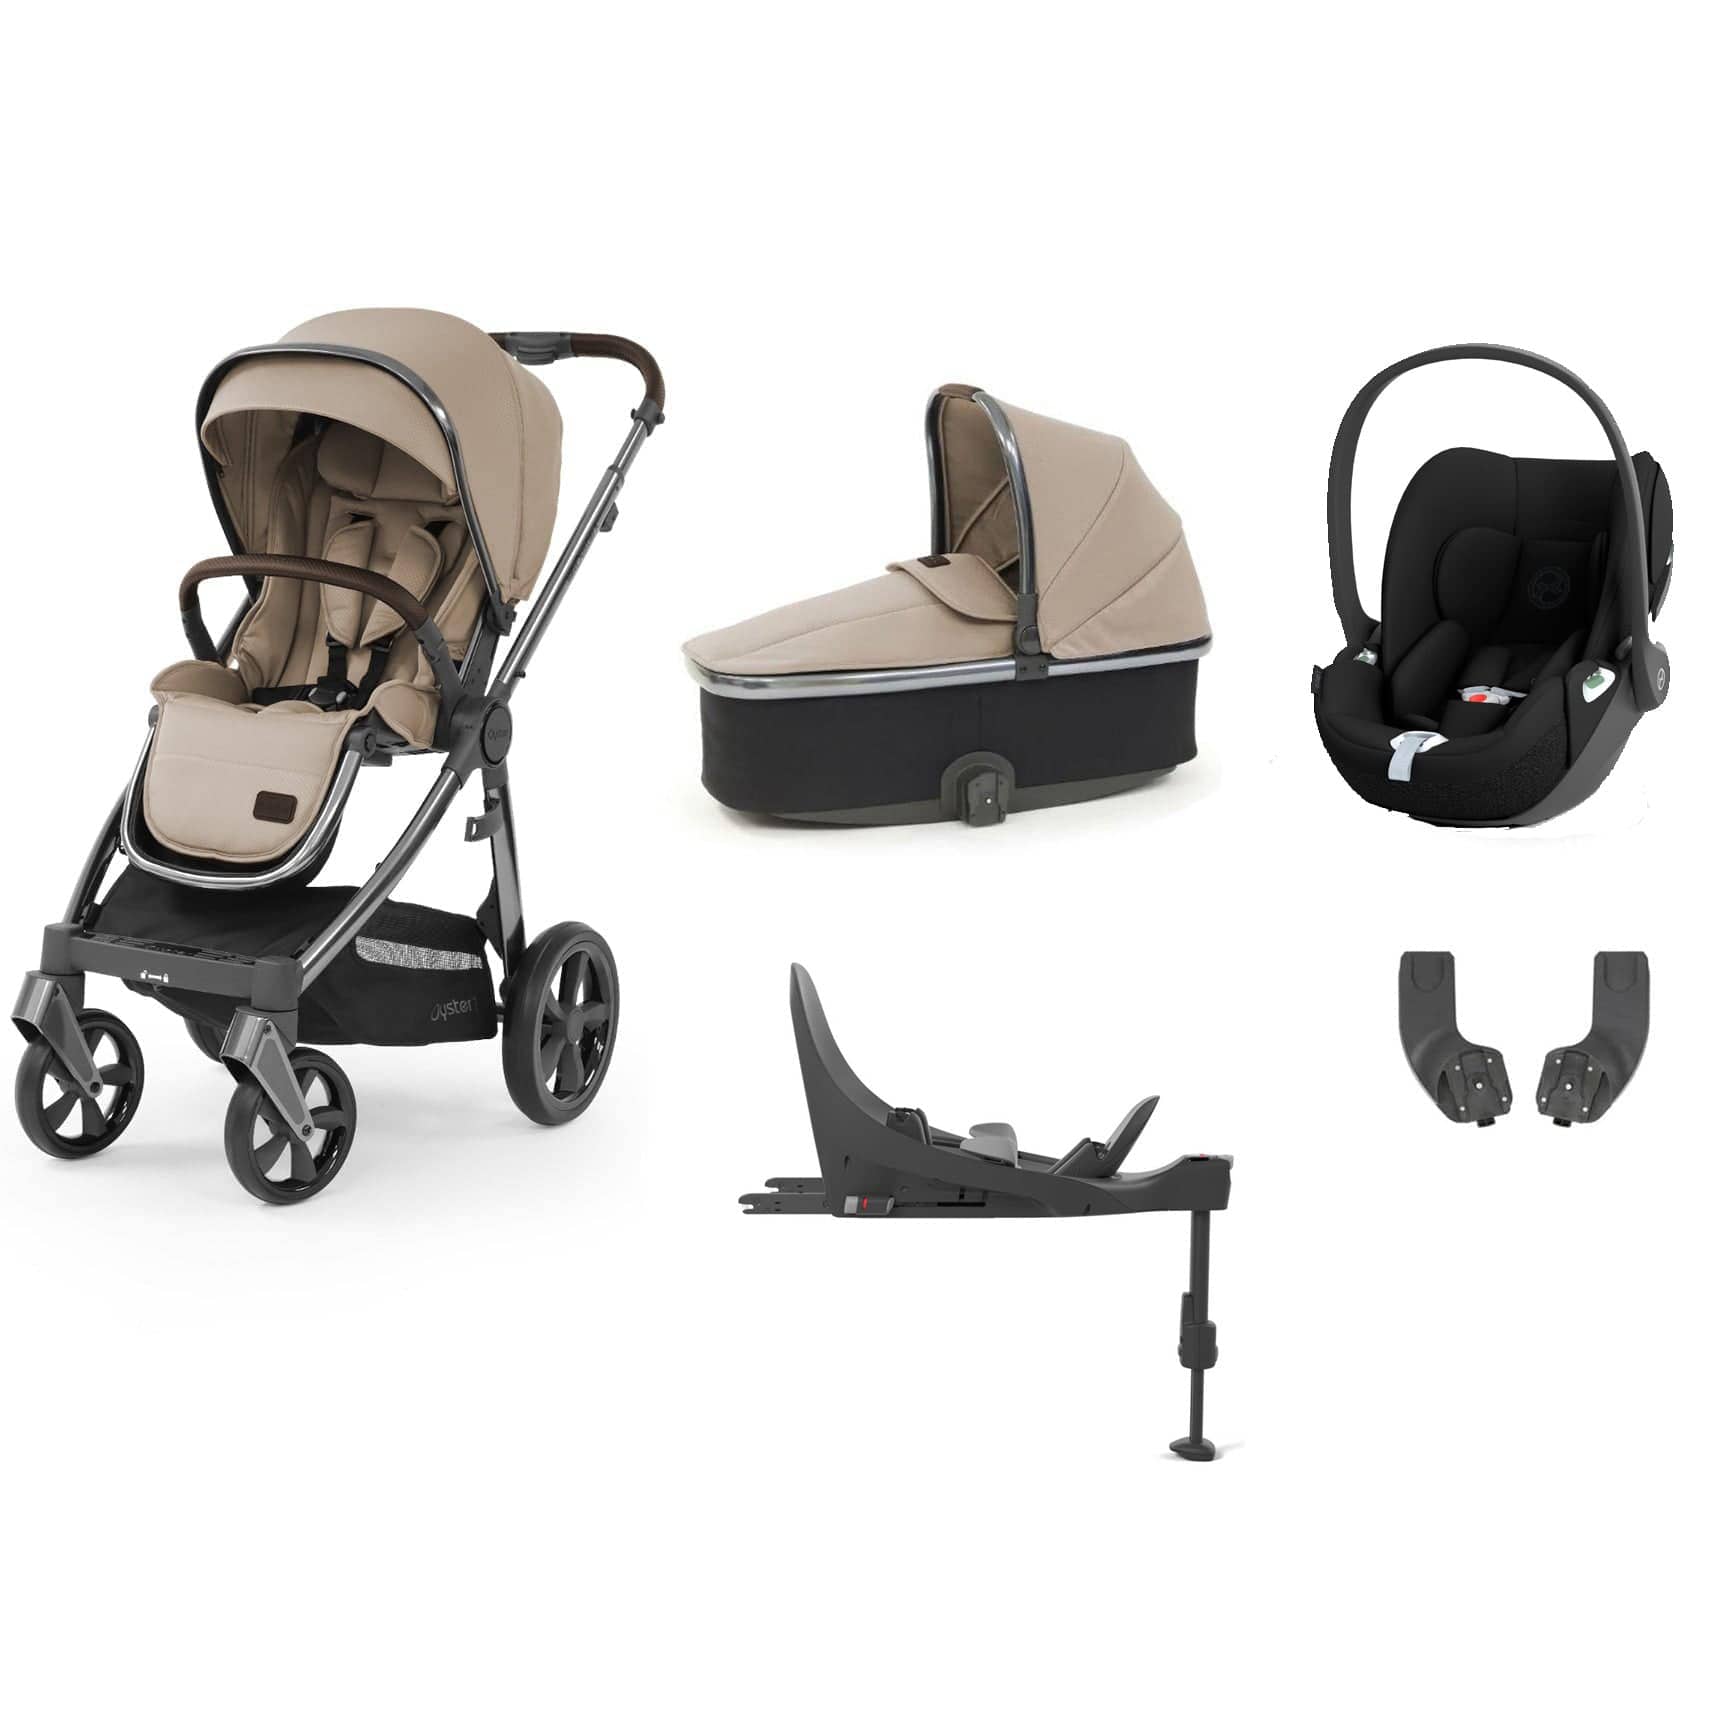 BabyStyle travel systems Babystyle Oyster 3 Essential Bundle with Car Seat - Butterscotch 13567-BTS